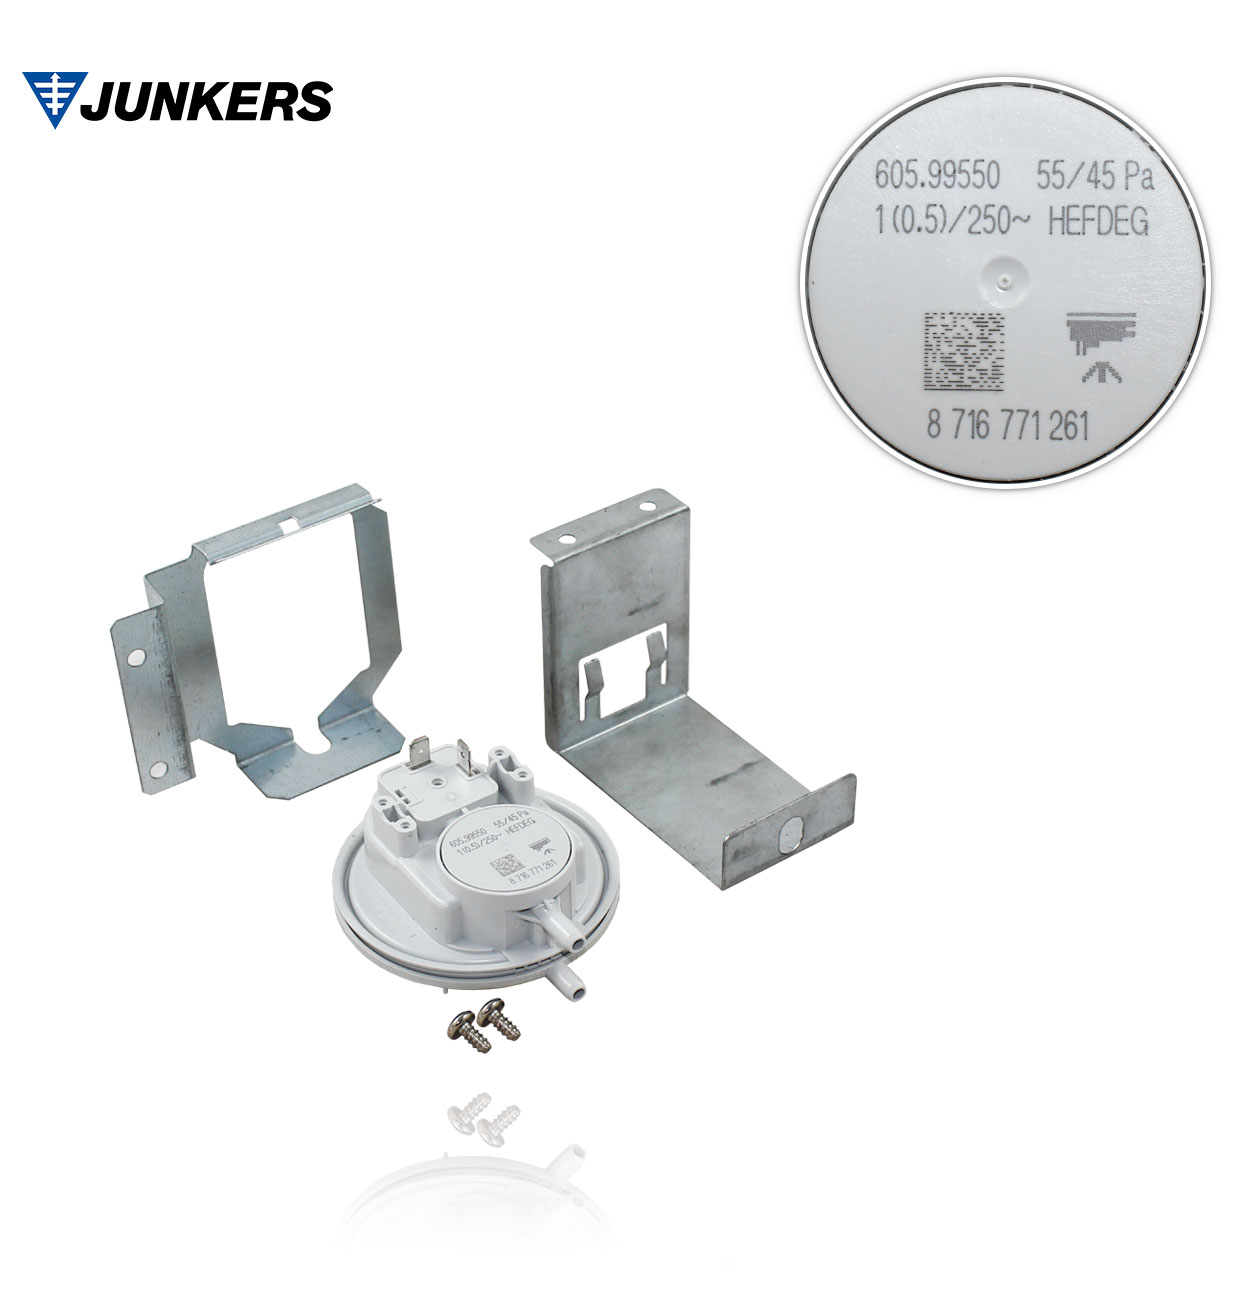 JUNKERS 8716771261 ZWC AIR PRESSURE SWITCH